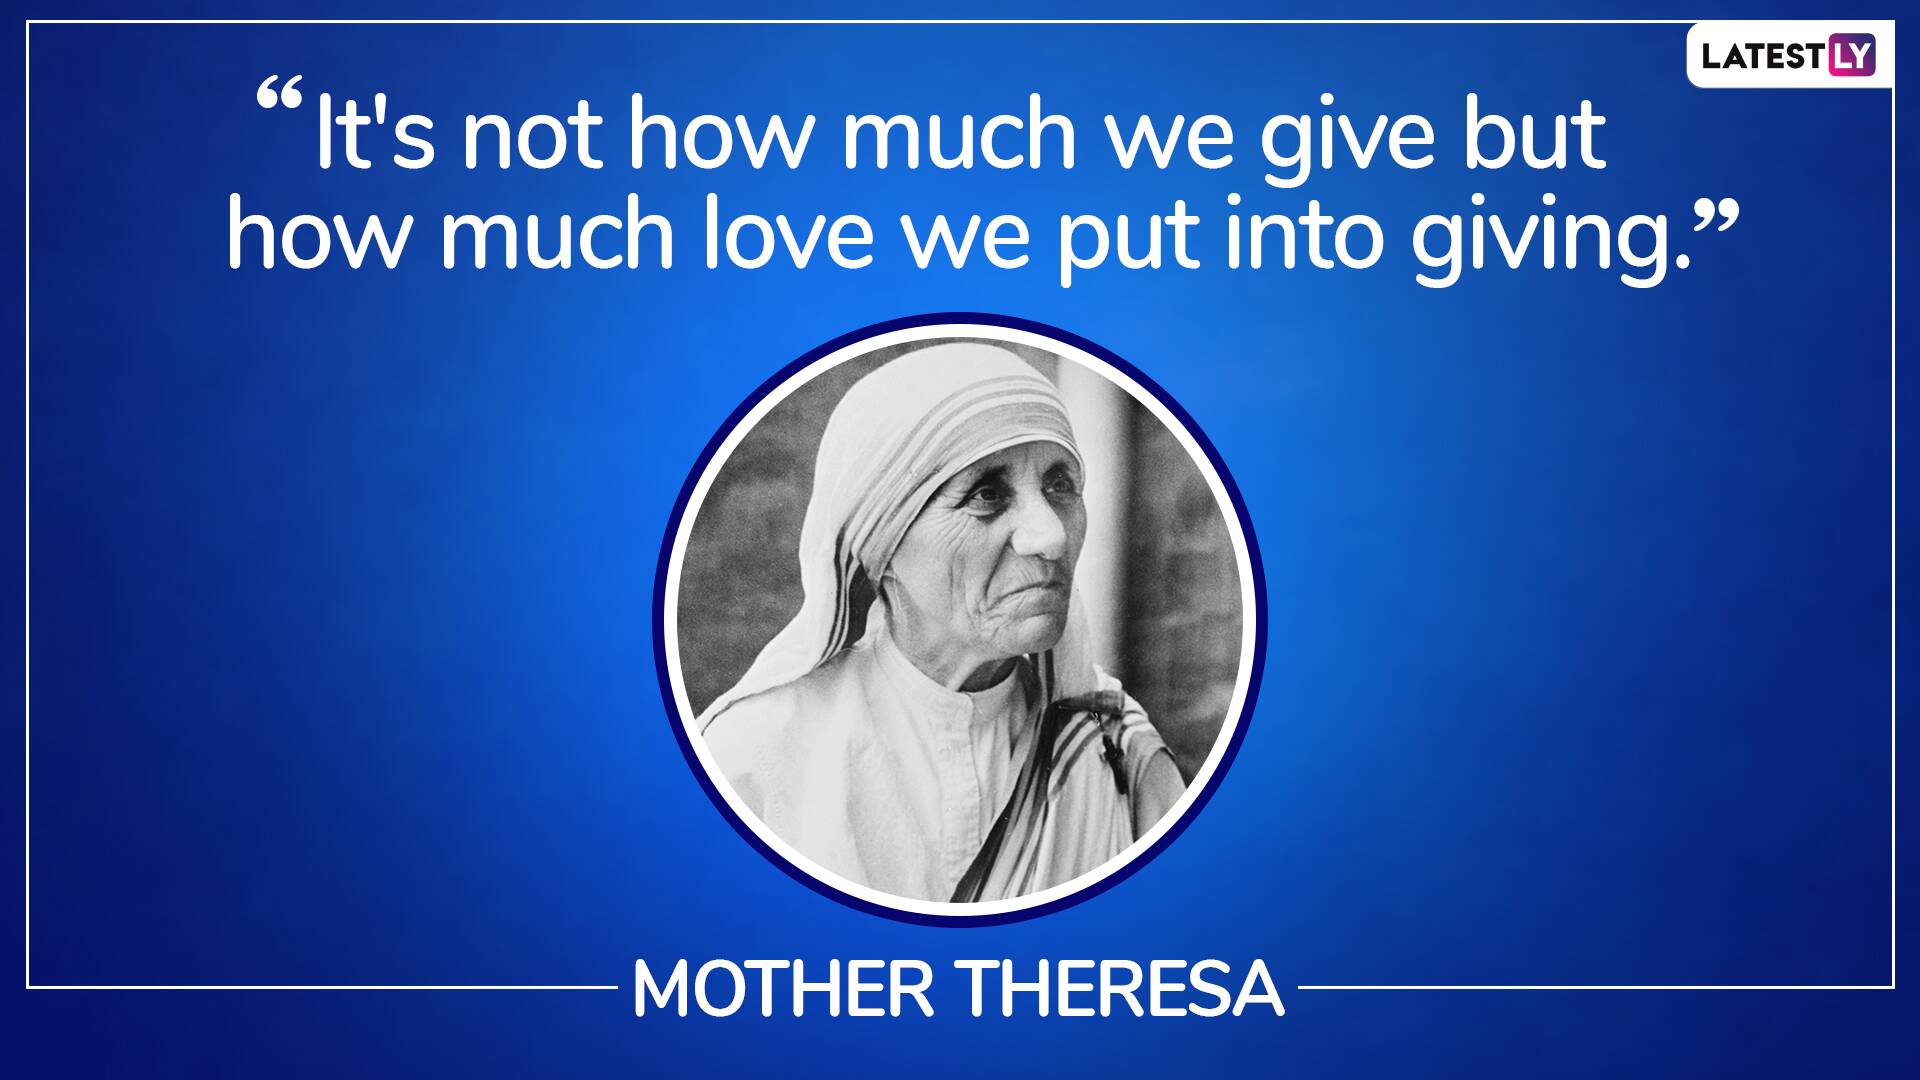 it’s not how much we give but how much love we put into giving